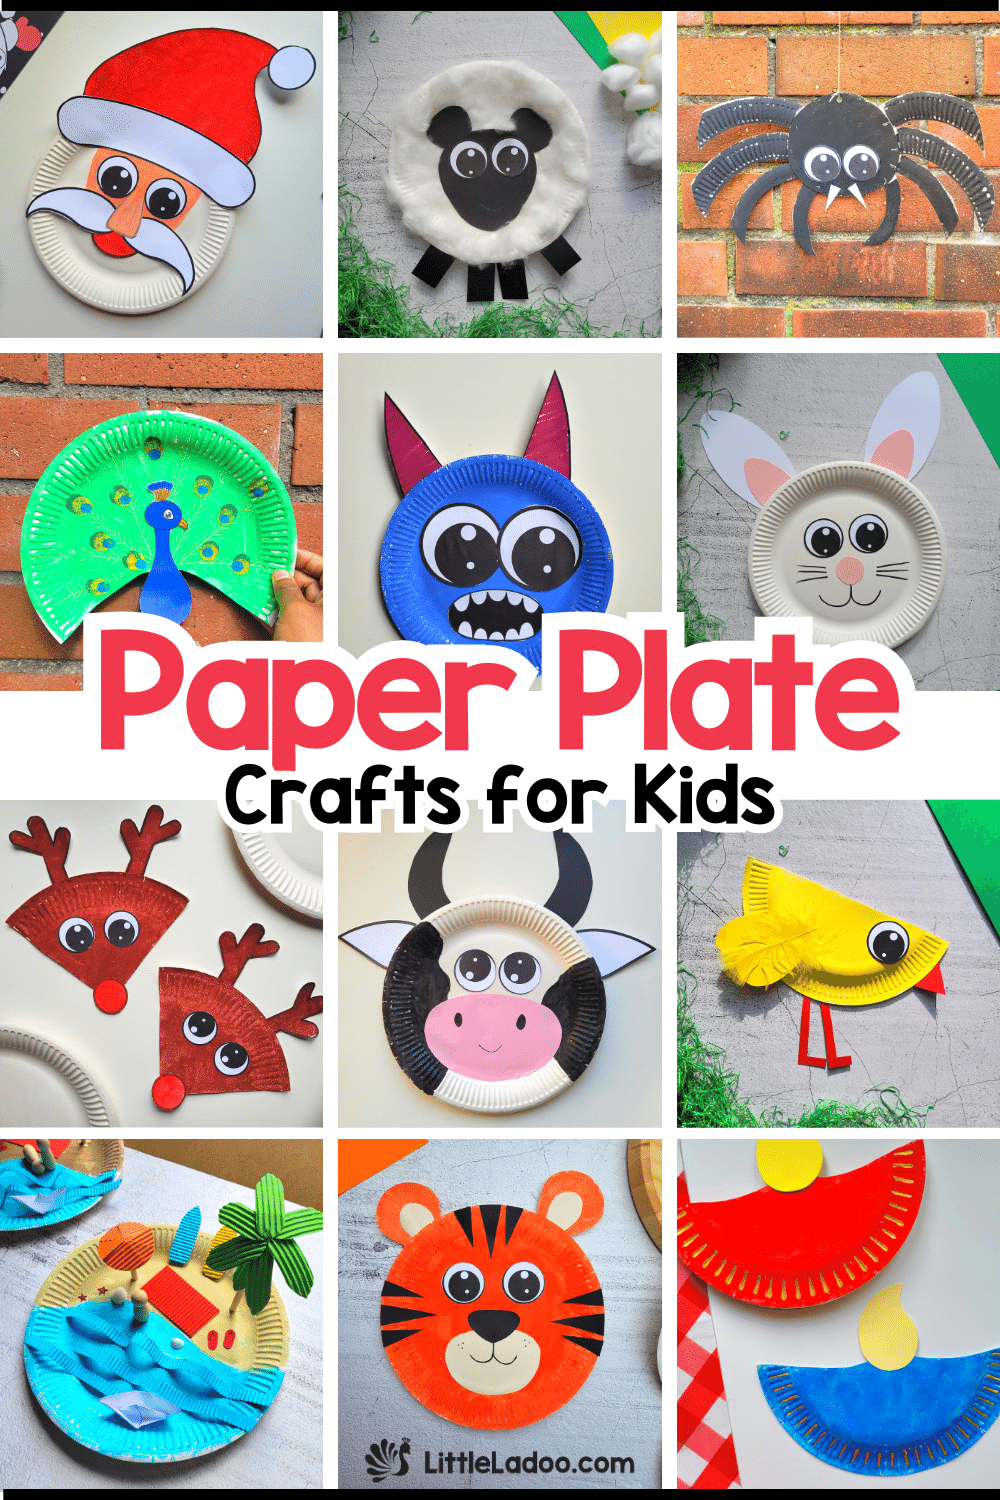 Paper Plate Crafts for kid